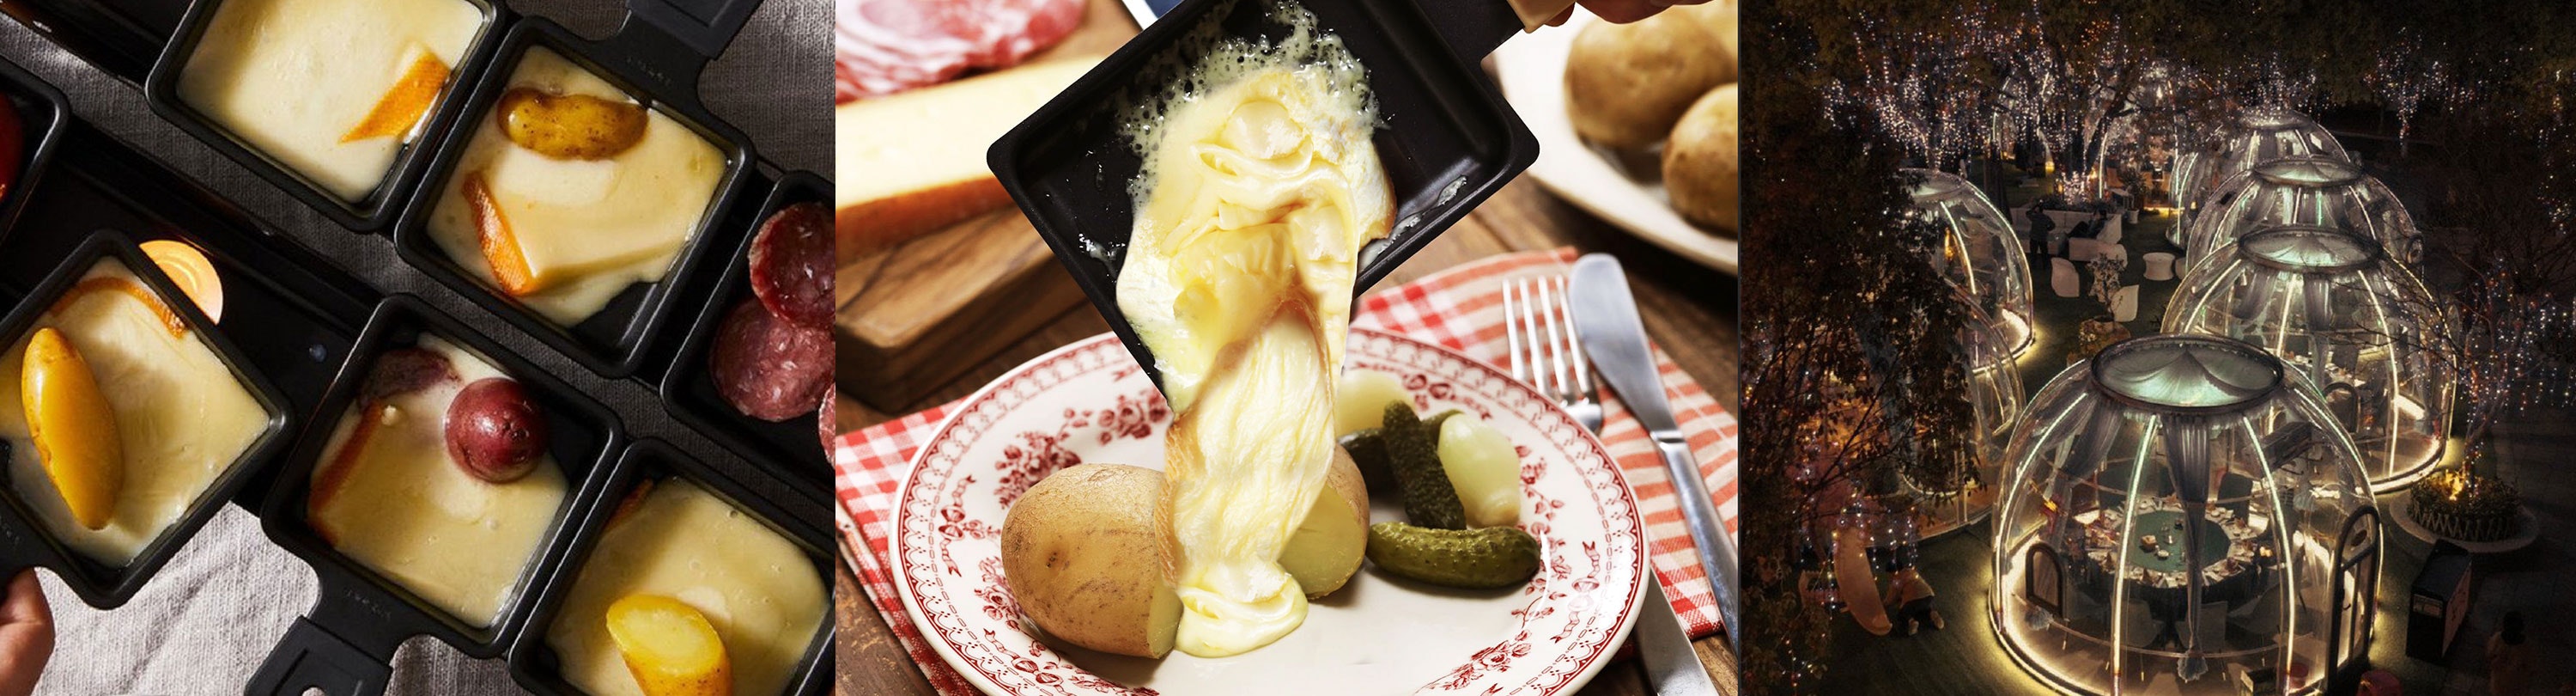 Raclette melted cheese being poured on potatoes and pickles